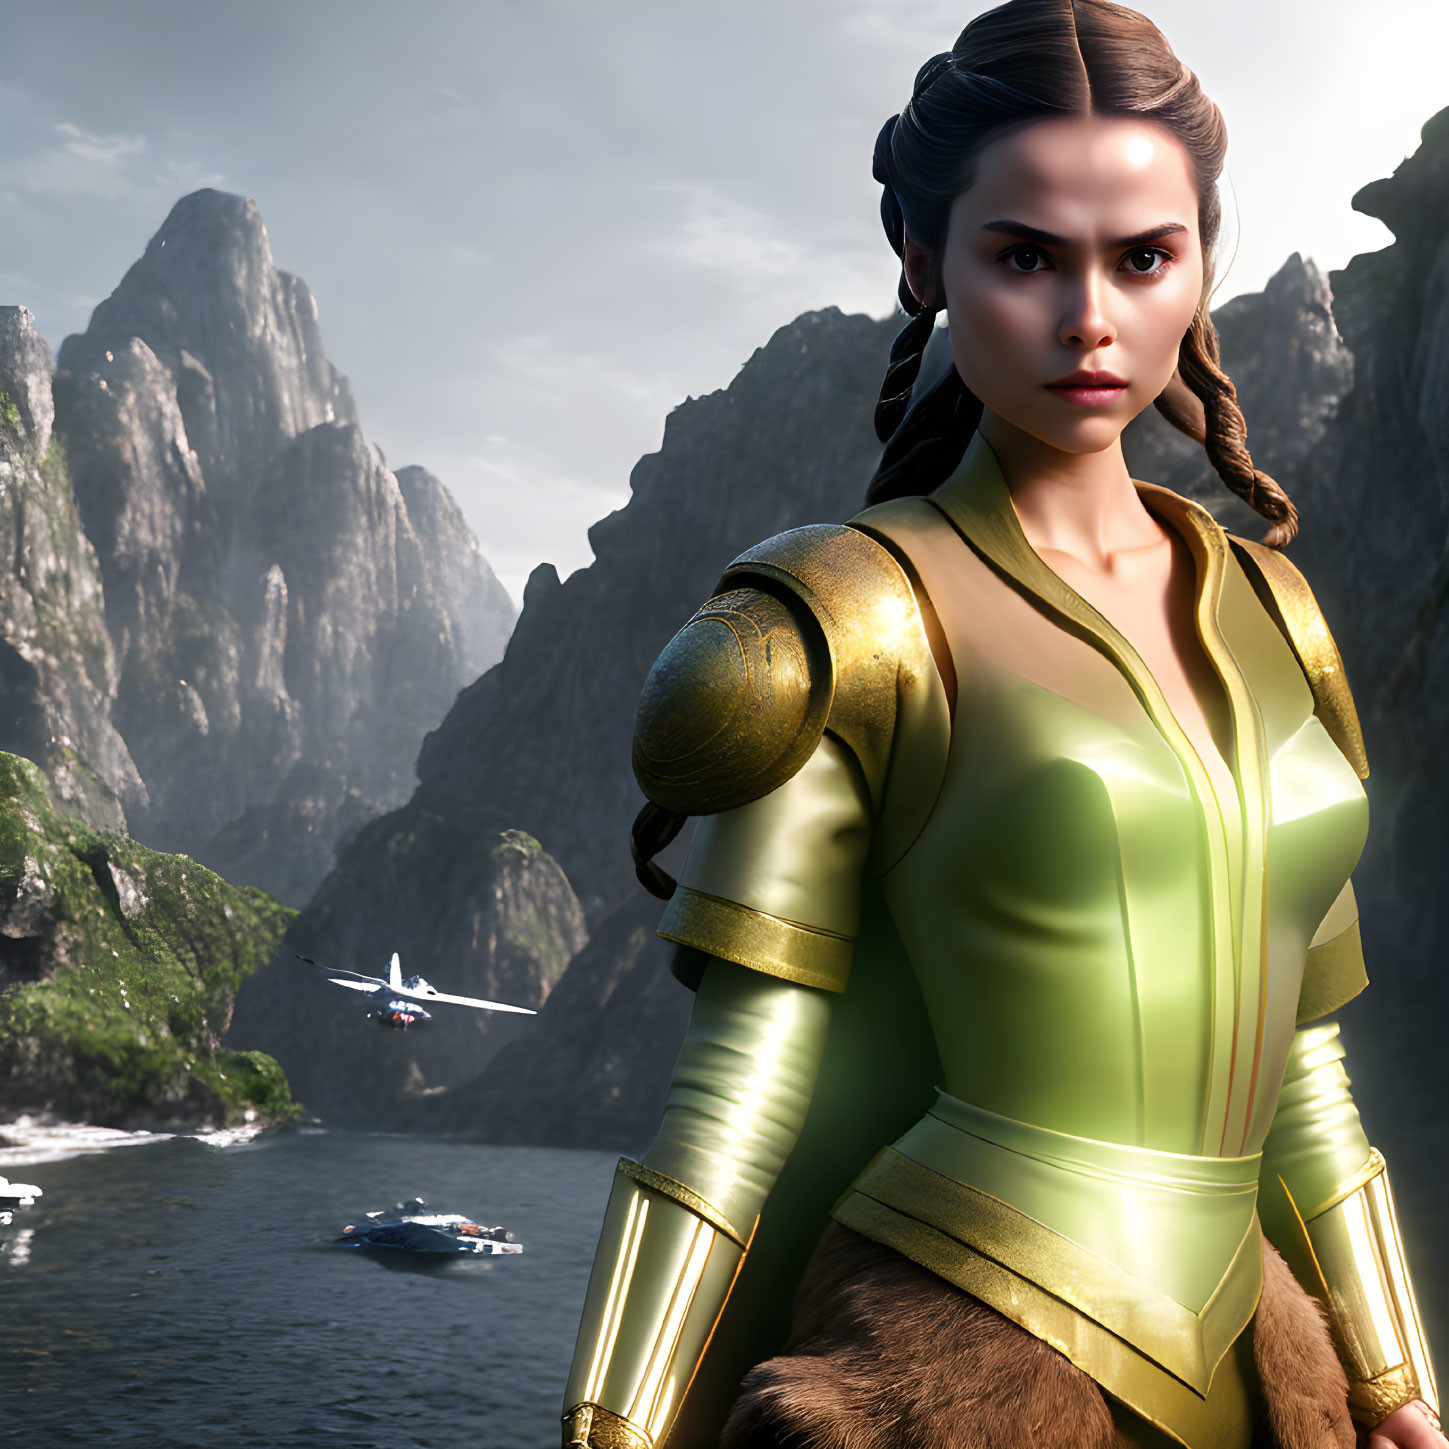 Female warrior in green and gold suit by rocky coast with jets flying overhead